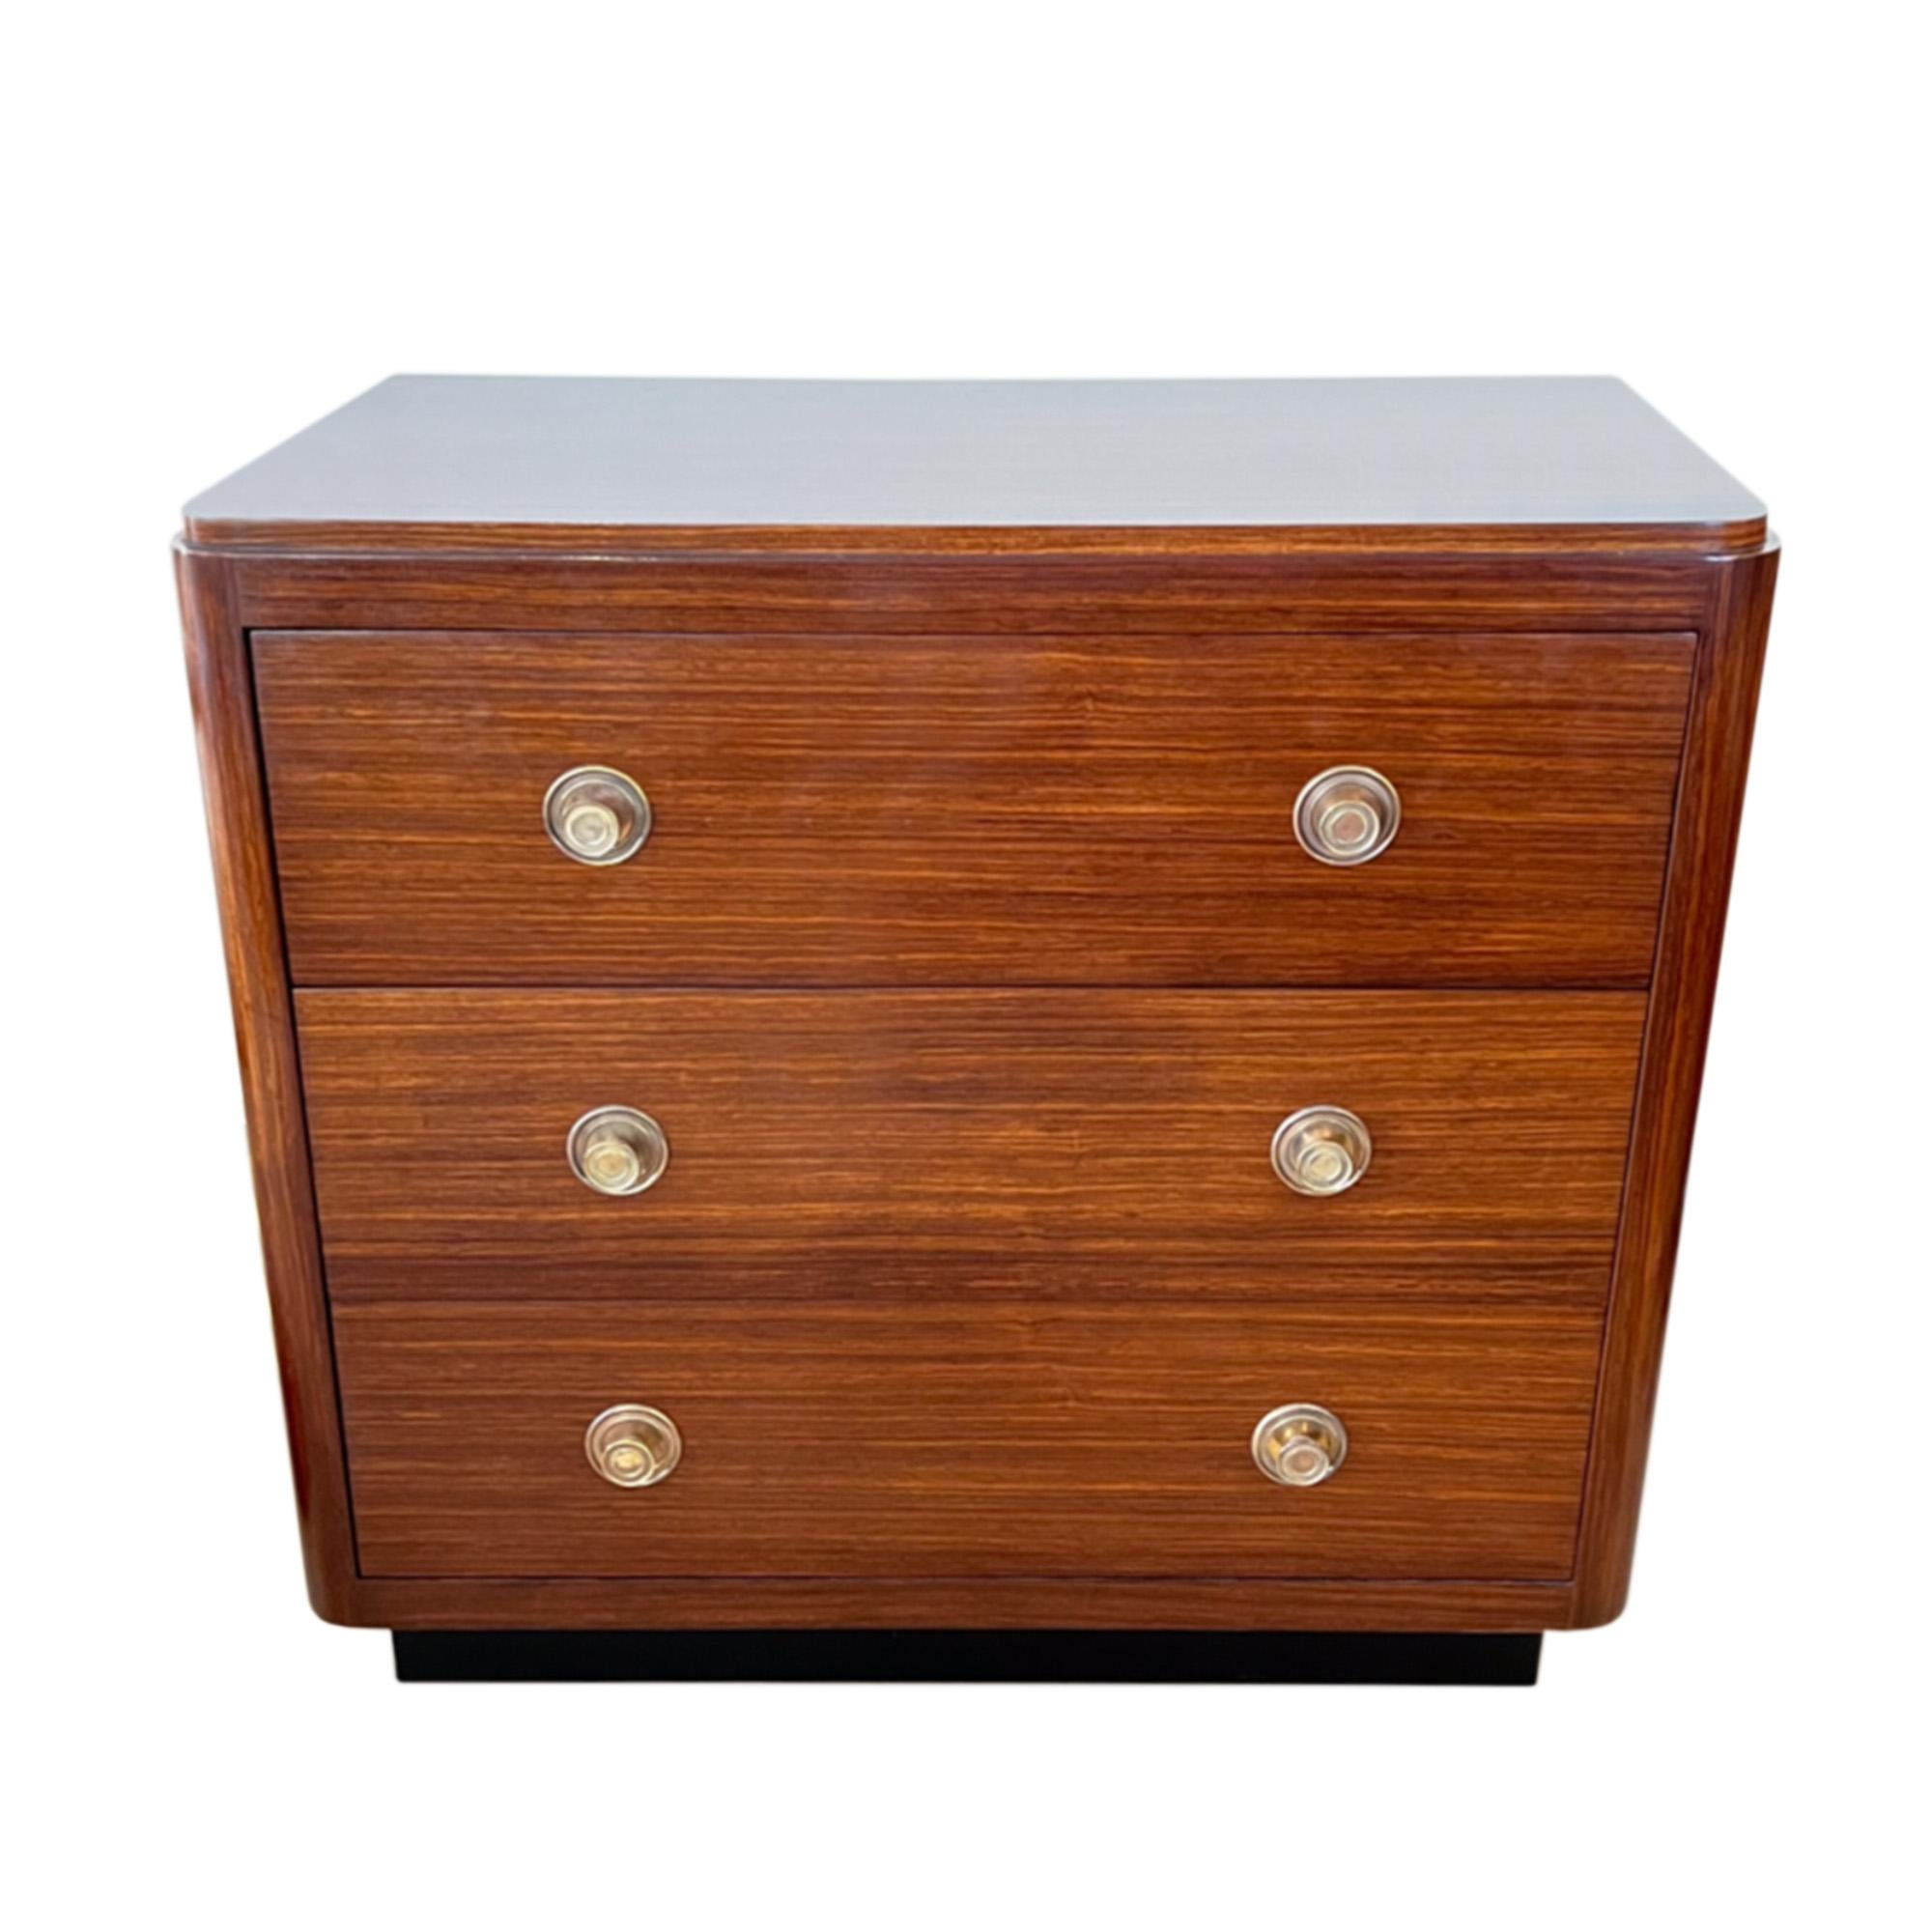 This stylish and neat midcentury chest of drawers was made in France in the 1960s.

Please take a look at all our pictures to see the beautiful colour and grain of the teak wood and the attractive circular handles. 

The perfect size for a smaller